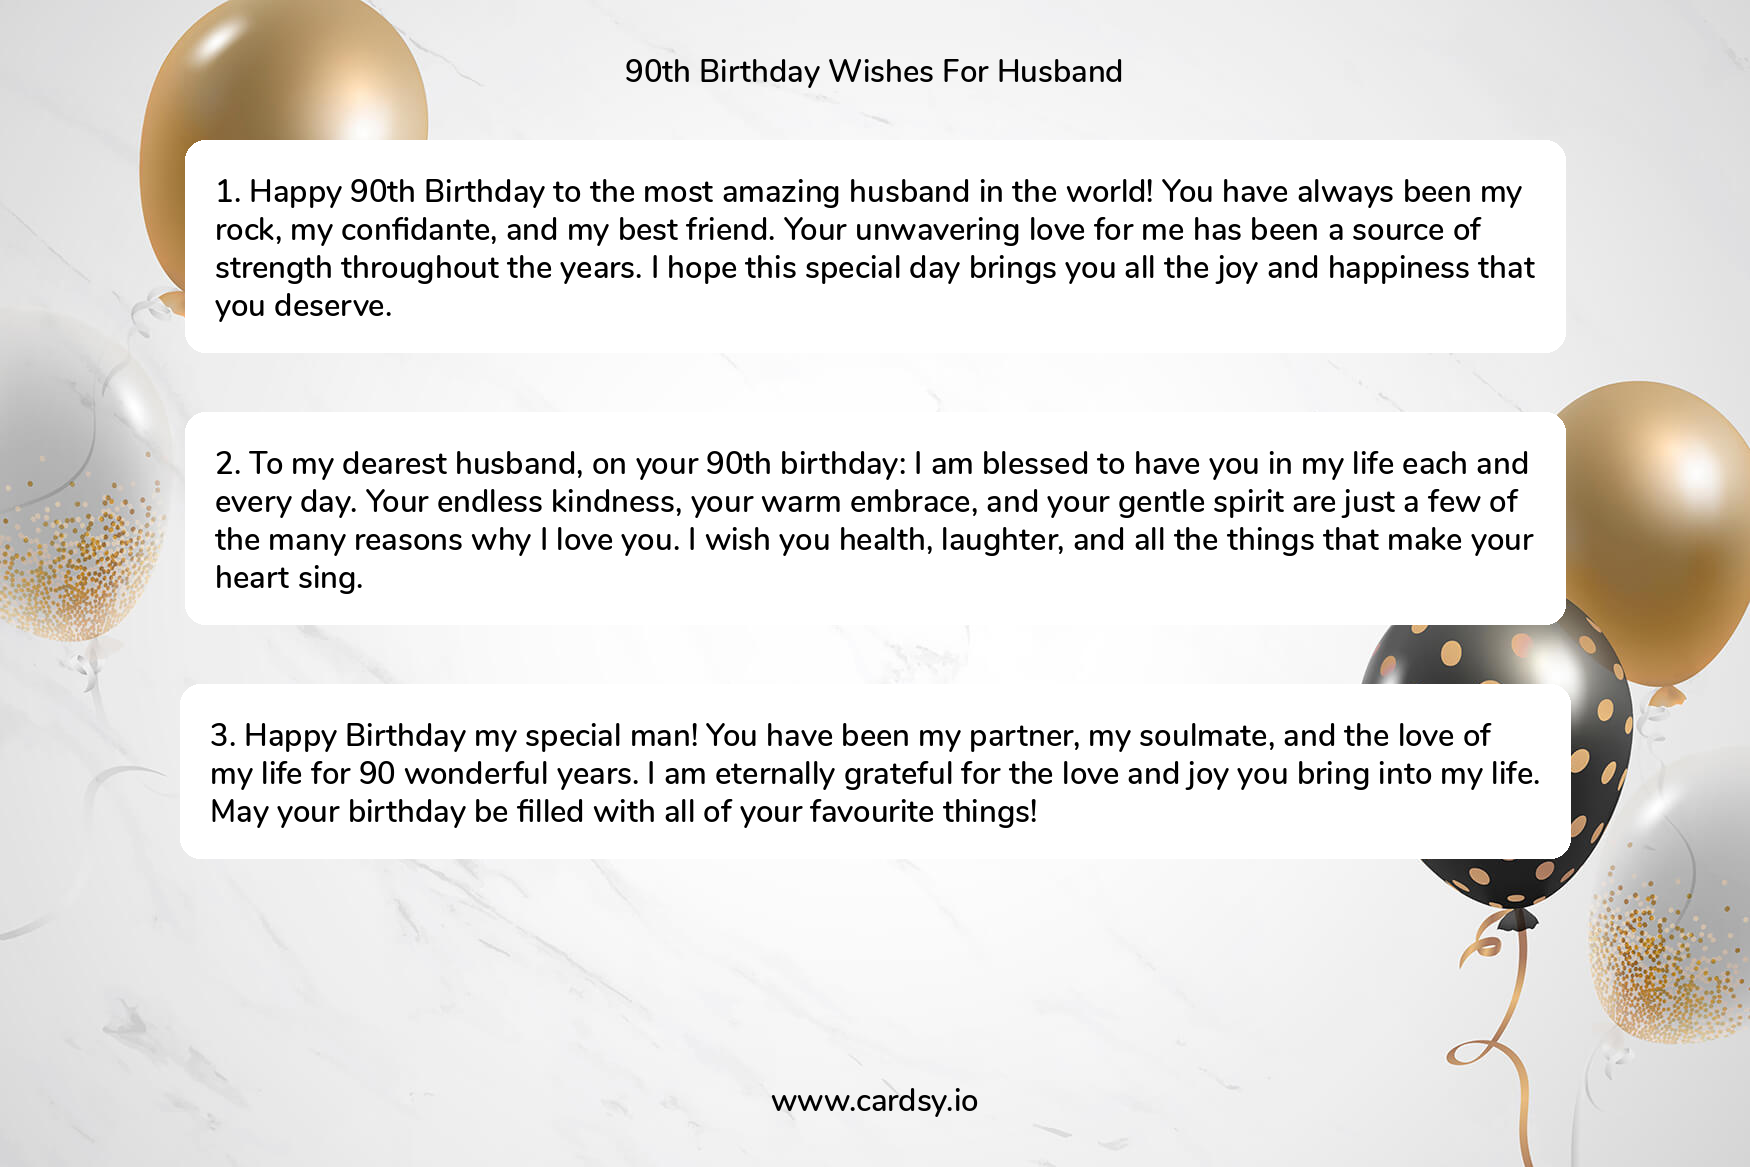 Happy 90th Birthday Sayings for Husband